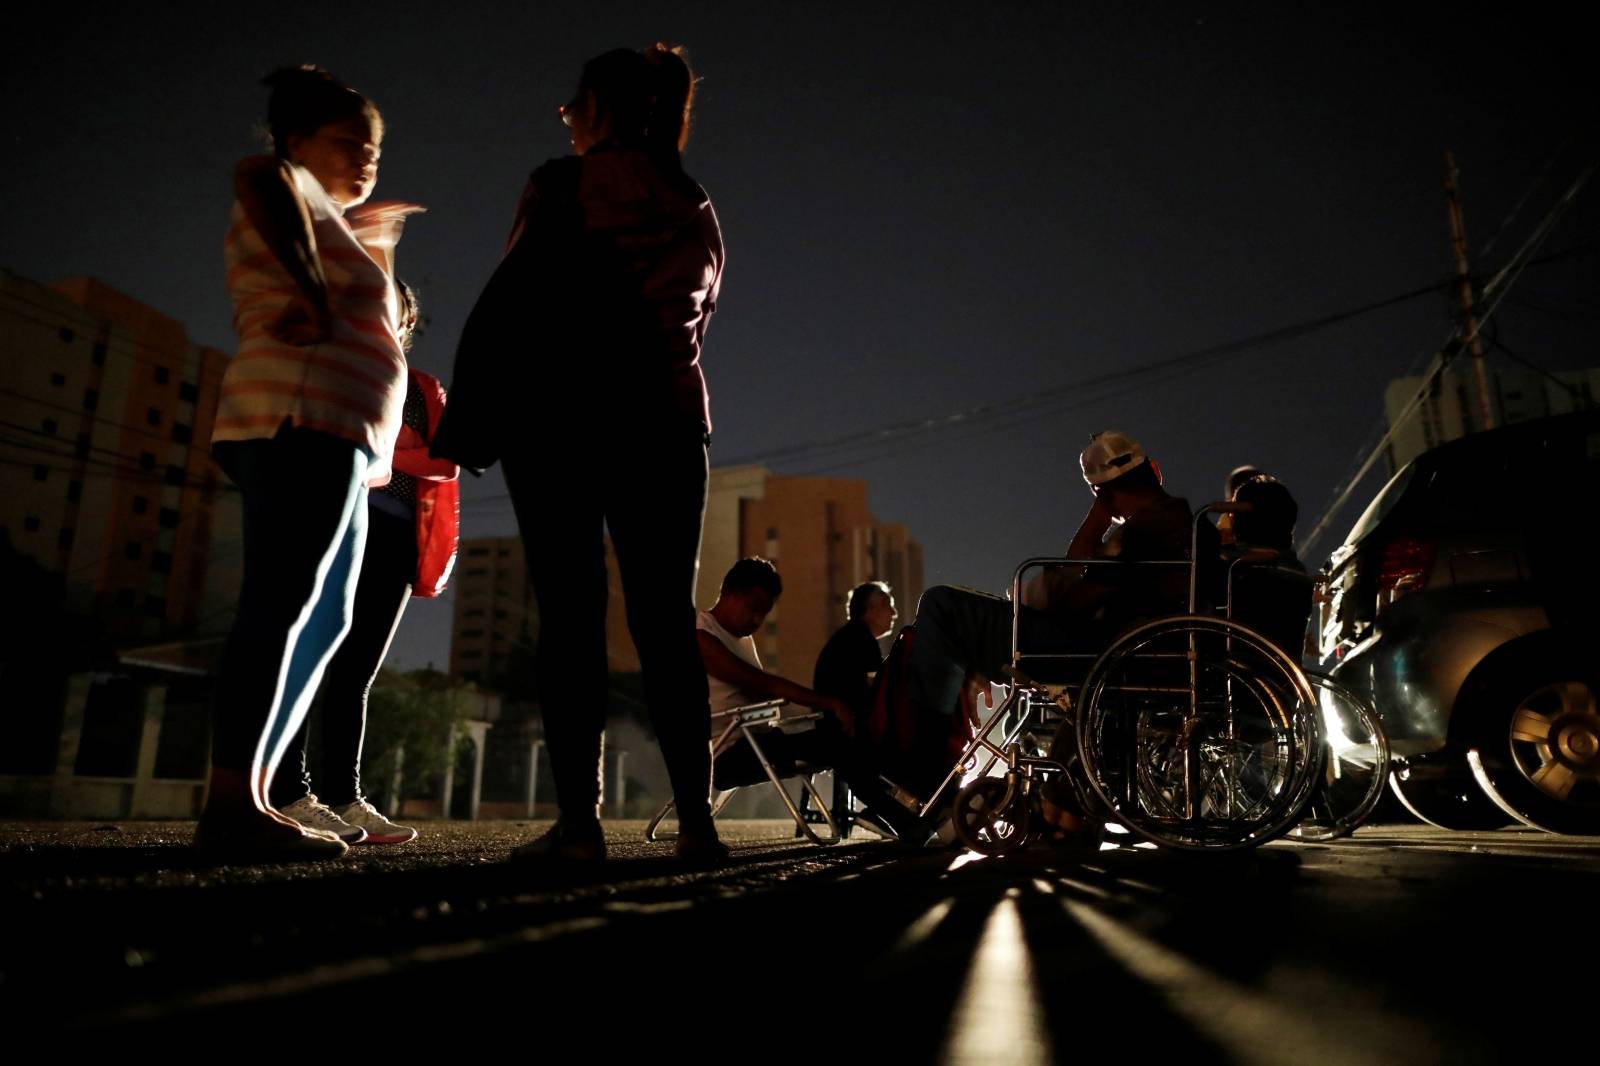 Patients with kidney disease and their relatives wait on the street for the return of electricity, in front of a dialysis center, during a blackout in Maracaibo